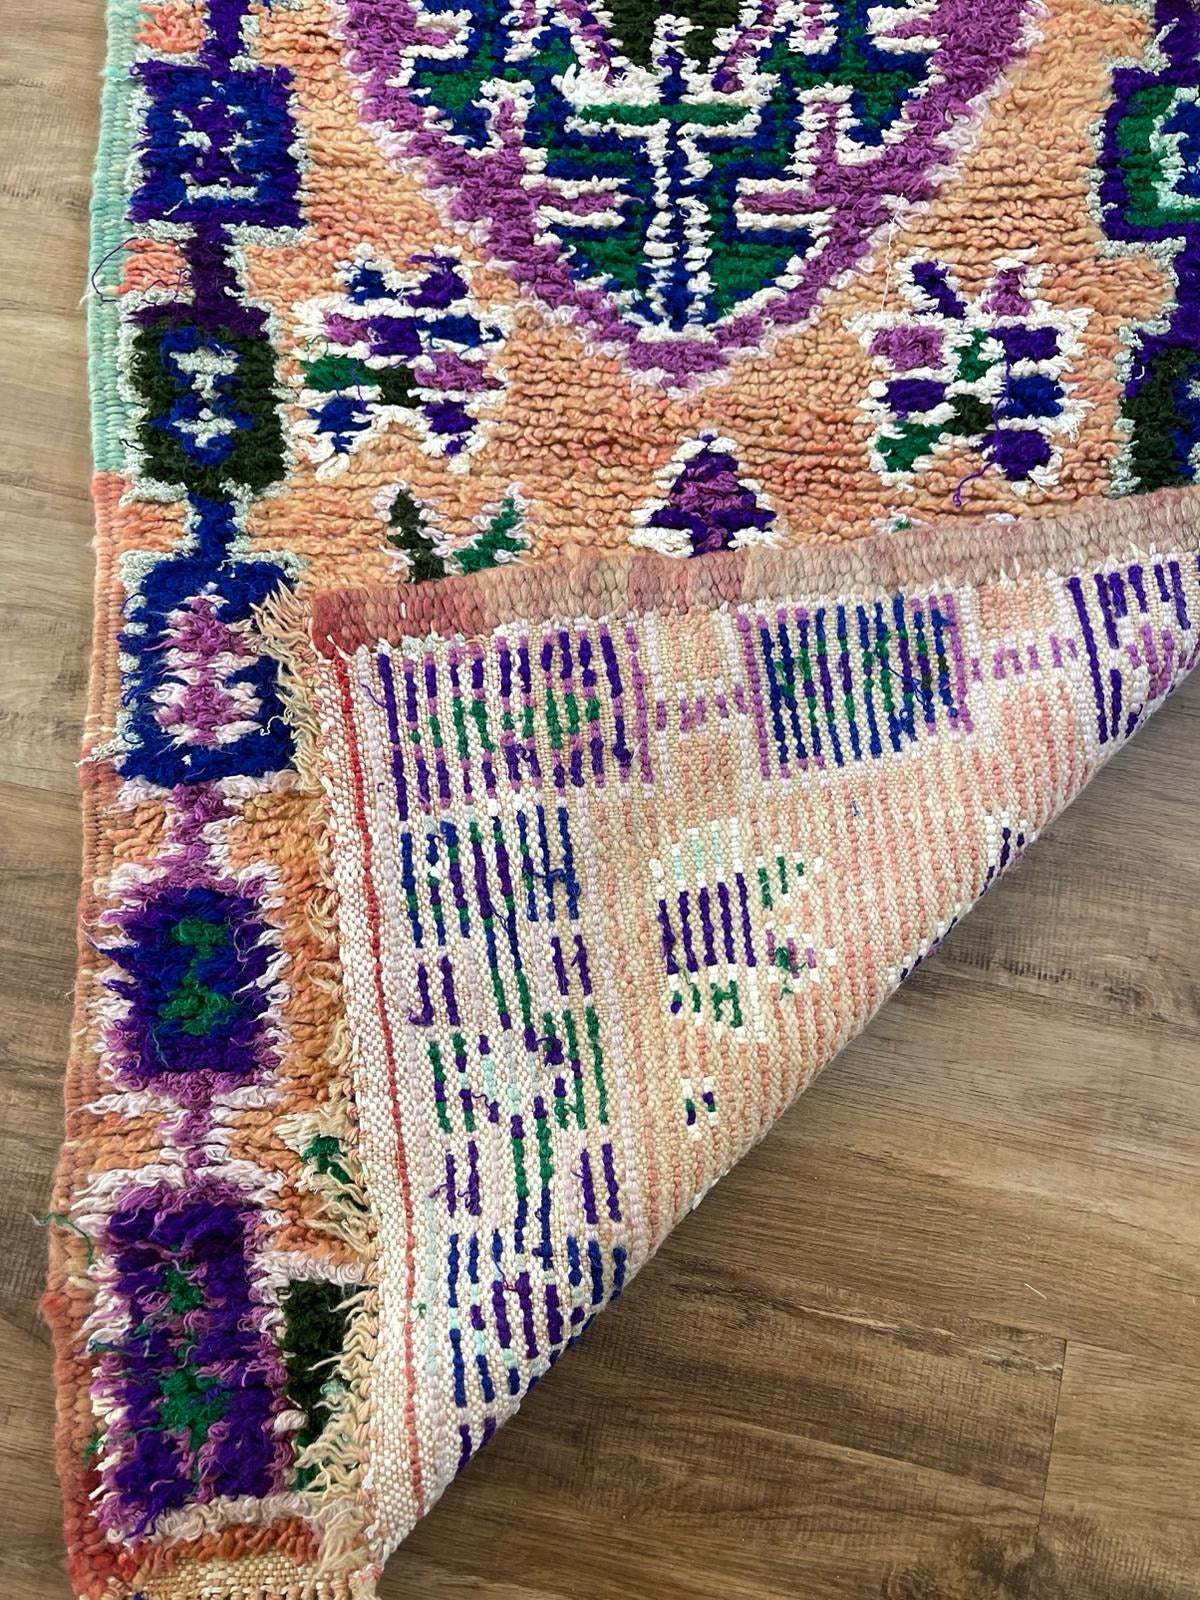 Vintage peach Moroccan runner with blue and purple tribal patterns and symbols